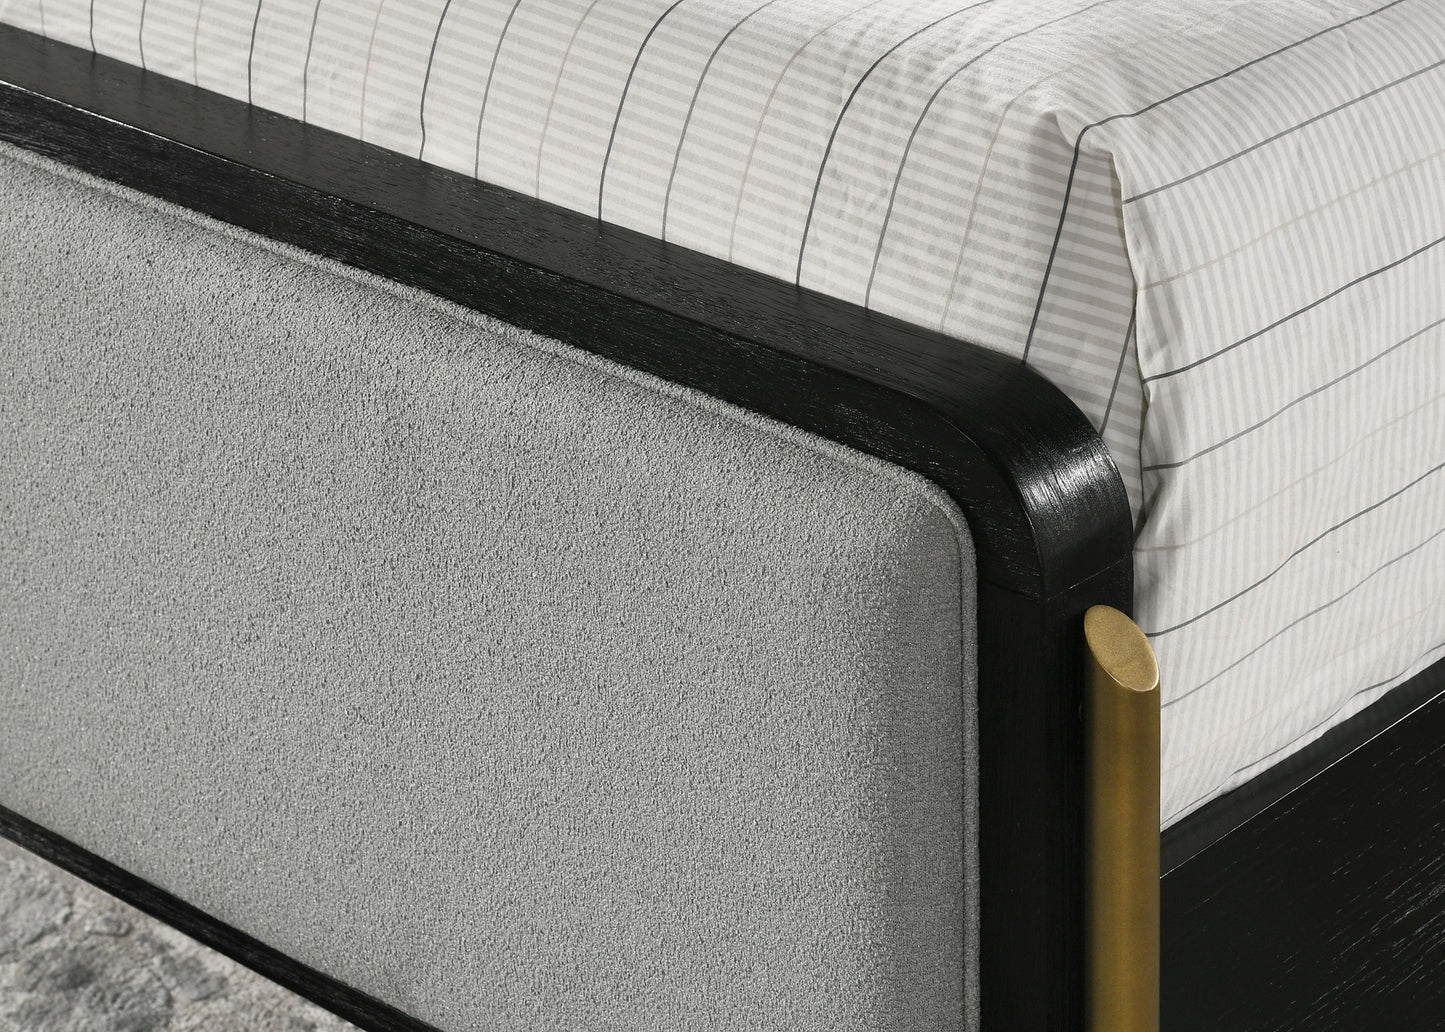 Arini Upholstered Eastern King Panel Bed Black and Grey